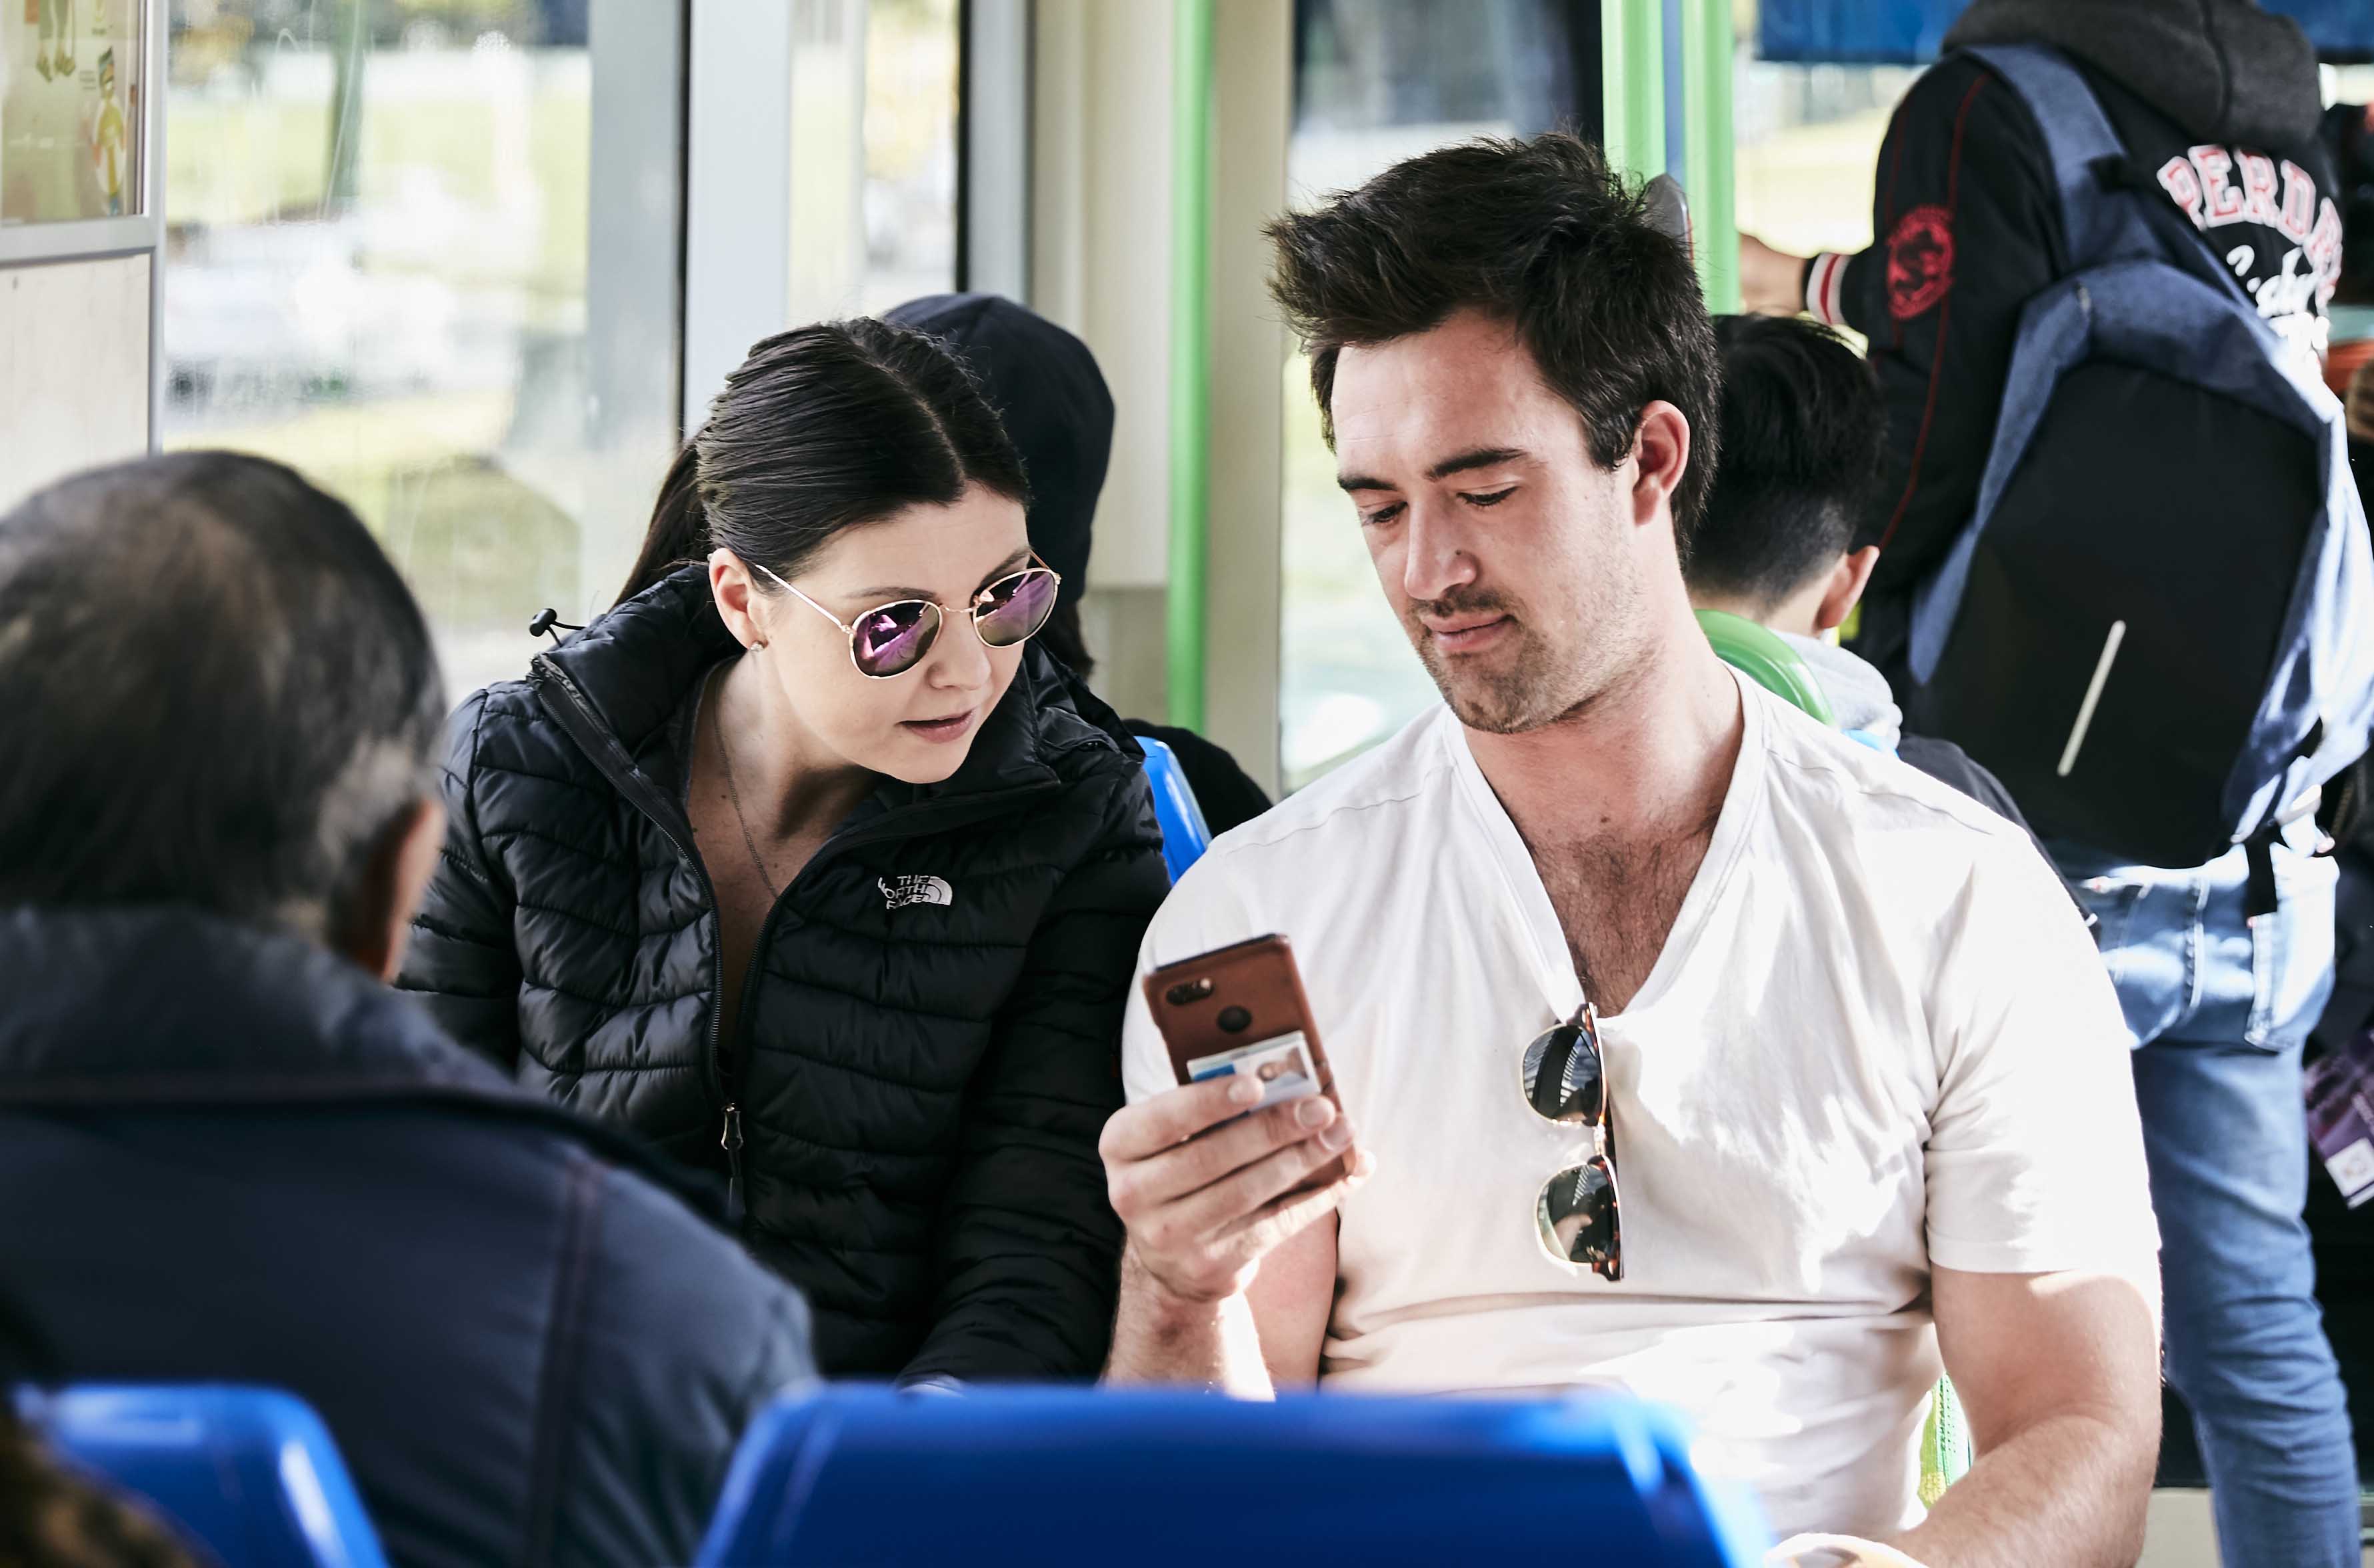 Image shows two people looking at a mobile phone while travelling on a tram.